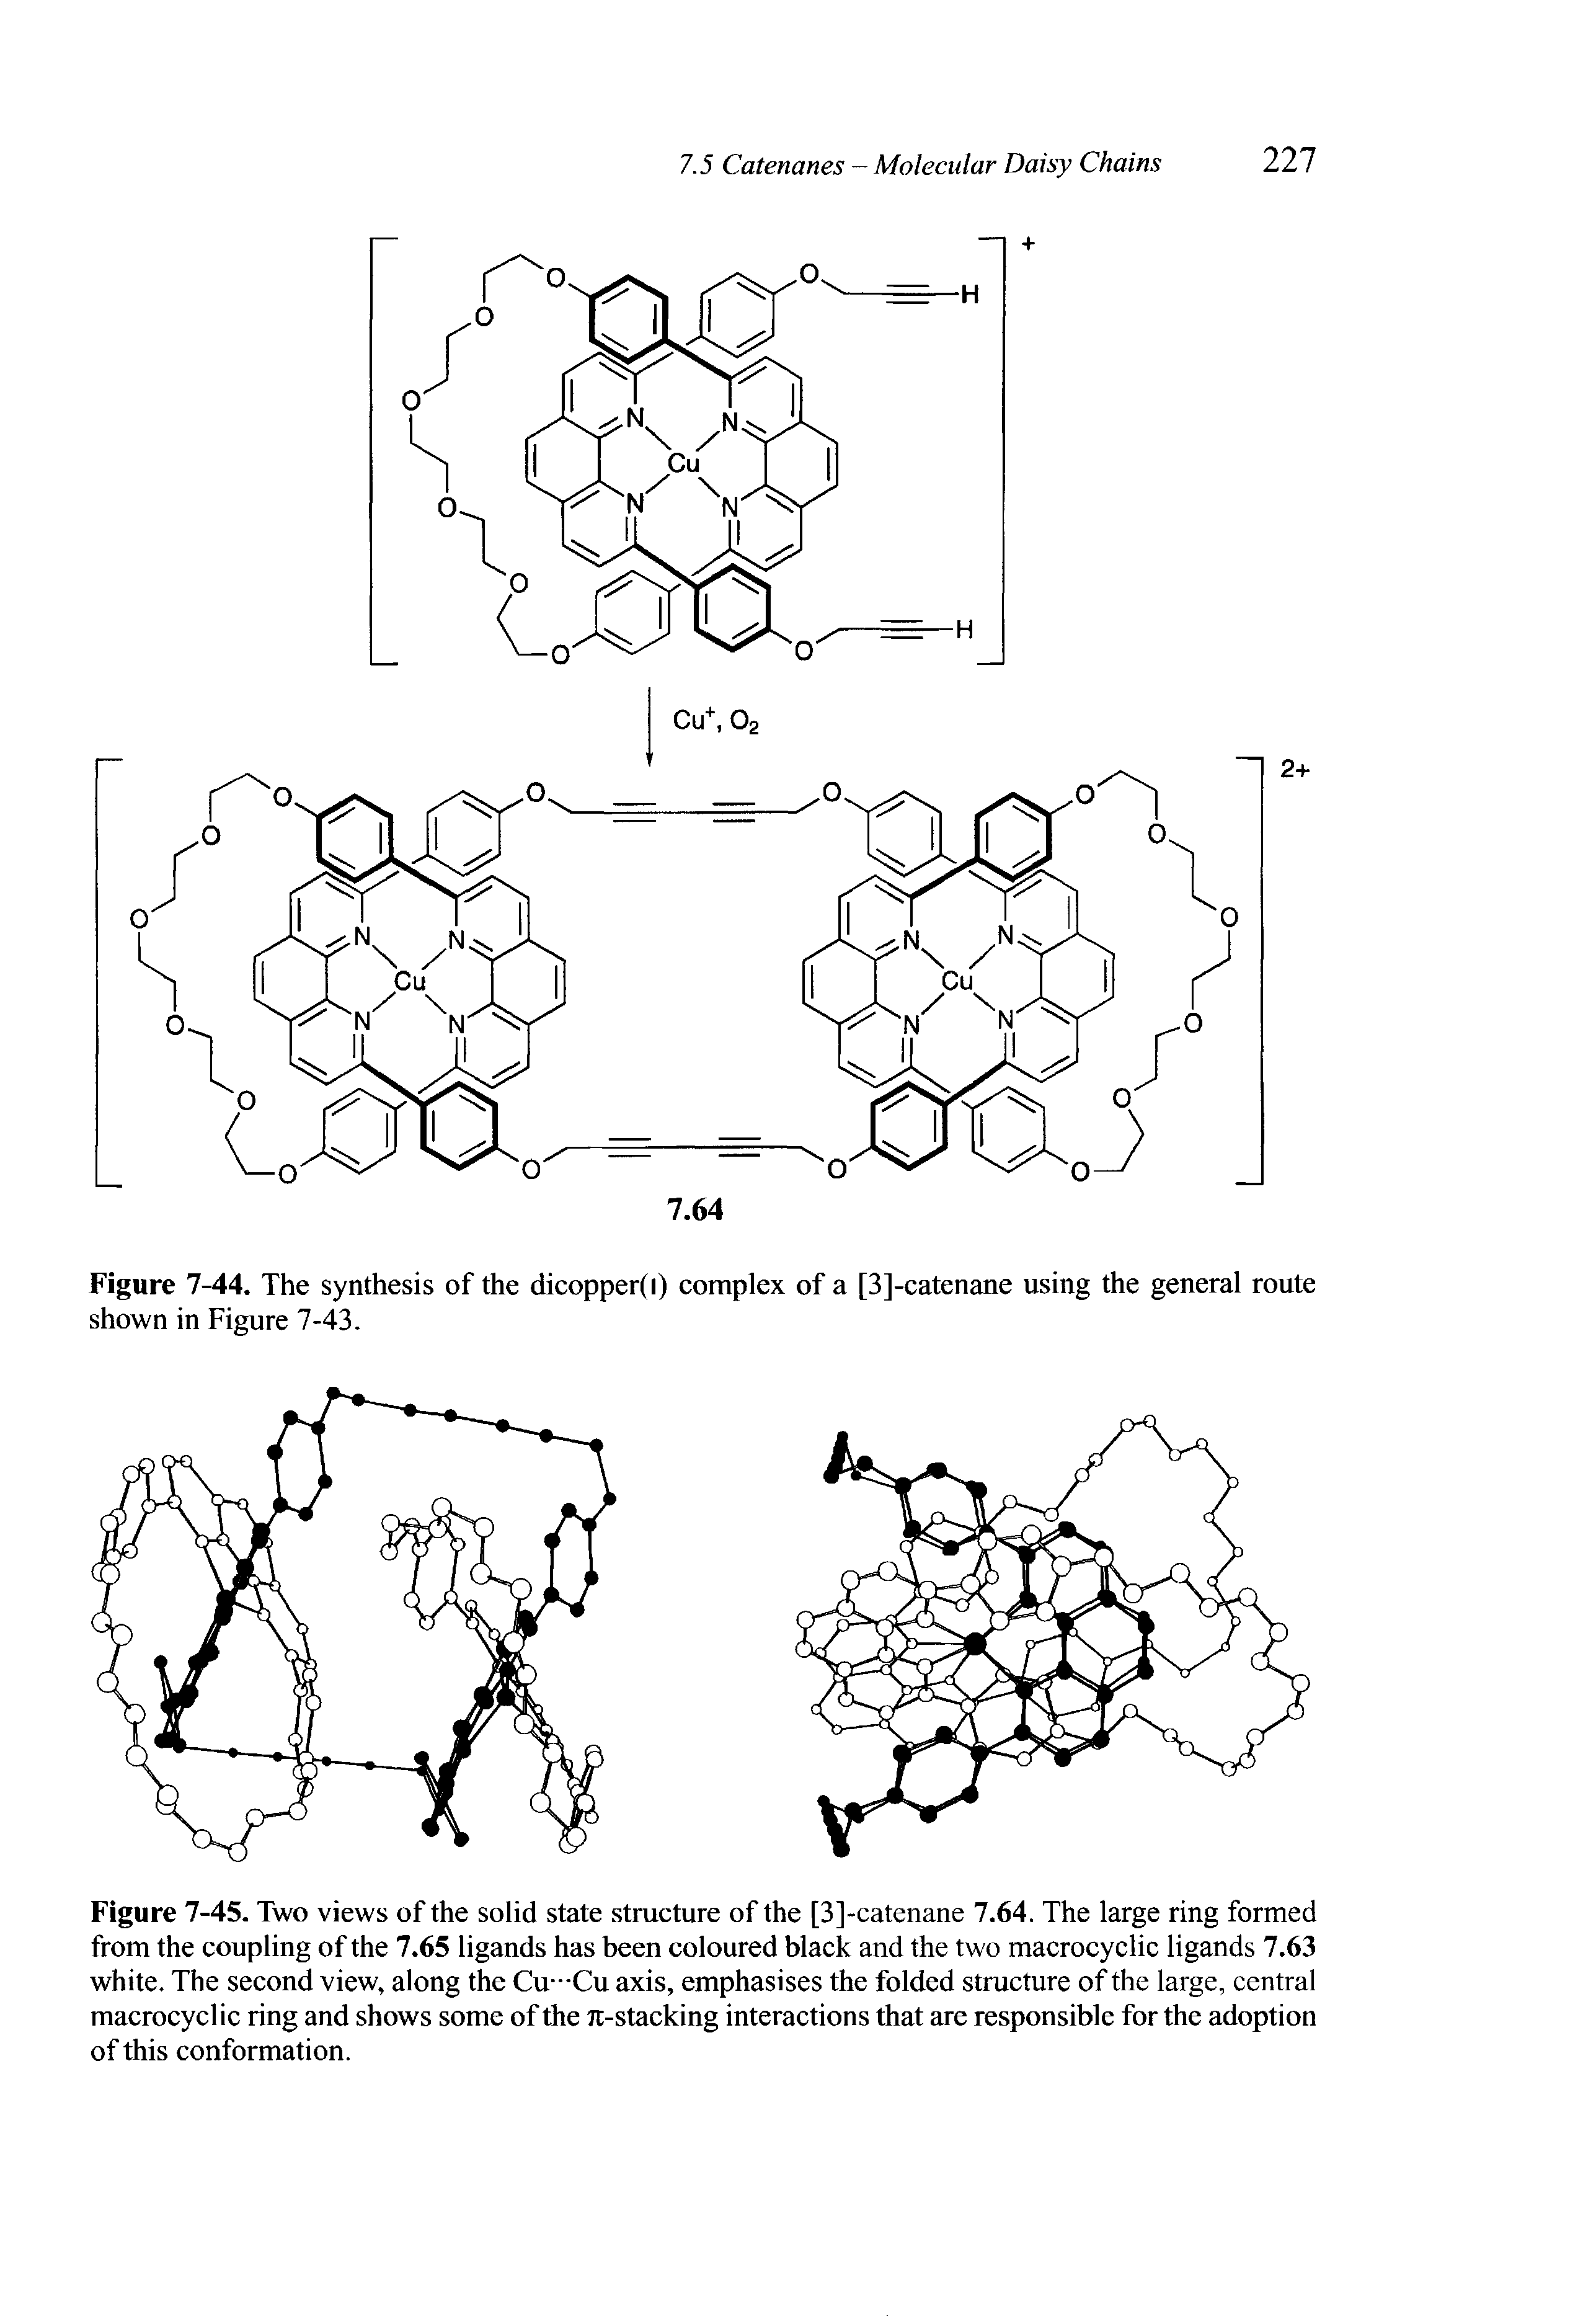 Figure 7-45. Two views of the solid state structure of the [3]-catenane 7.64. The large ring formed from the coupling of the 7.65 ligands has been coloured black and the two macrocyclic ligands 7.63 white. The second view, along the Cu—Cu axis, emphasises the folded structure of the large, central macrocyclic ring and shows some of the 7t-stacking interactions that are responsible for the adoption of this conformation.